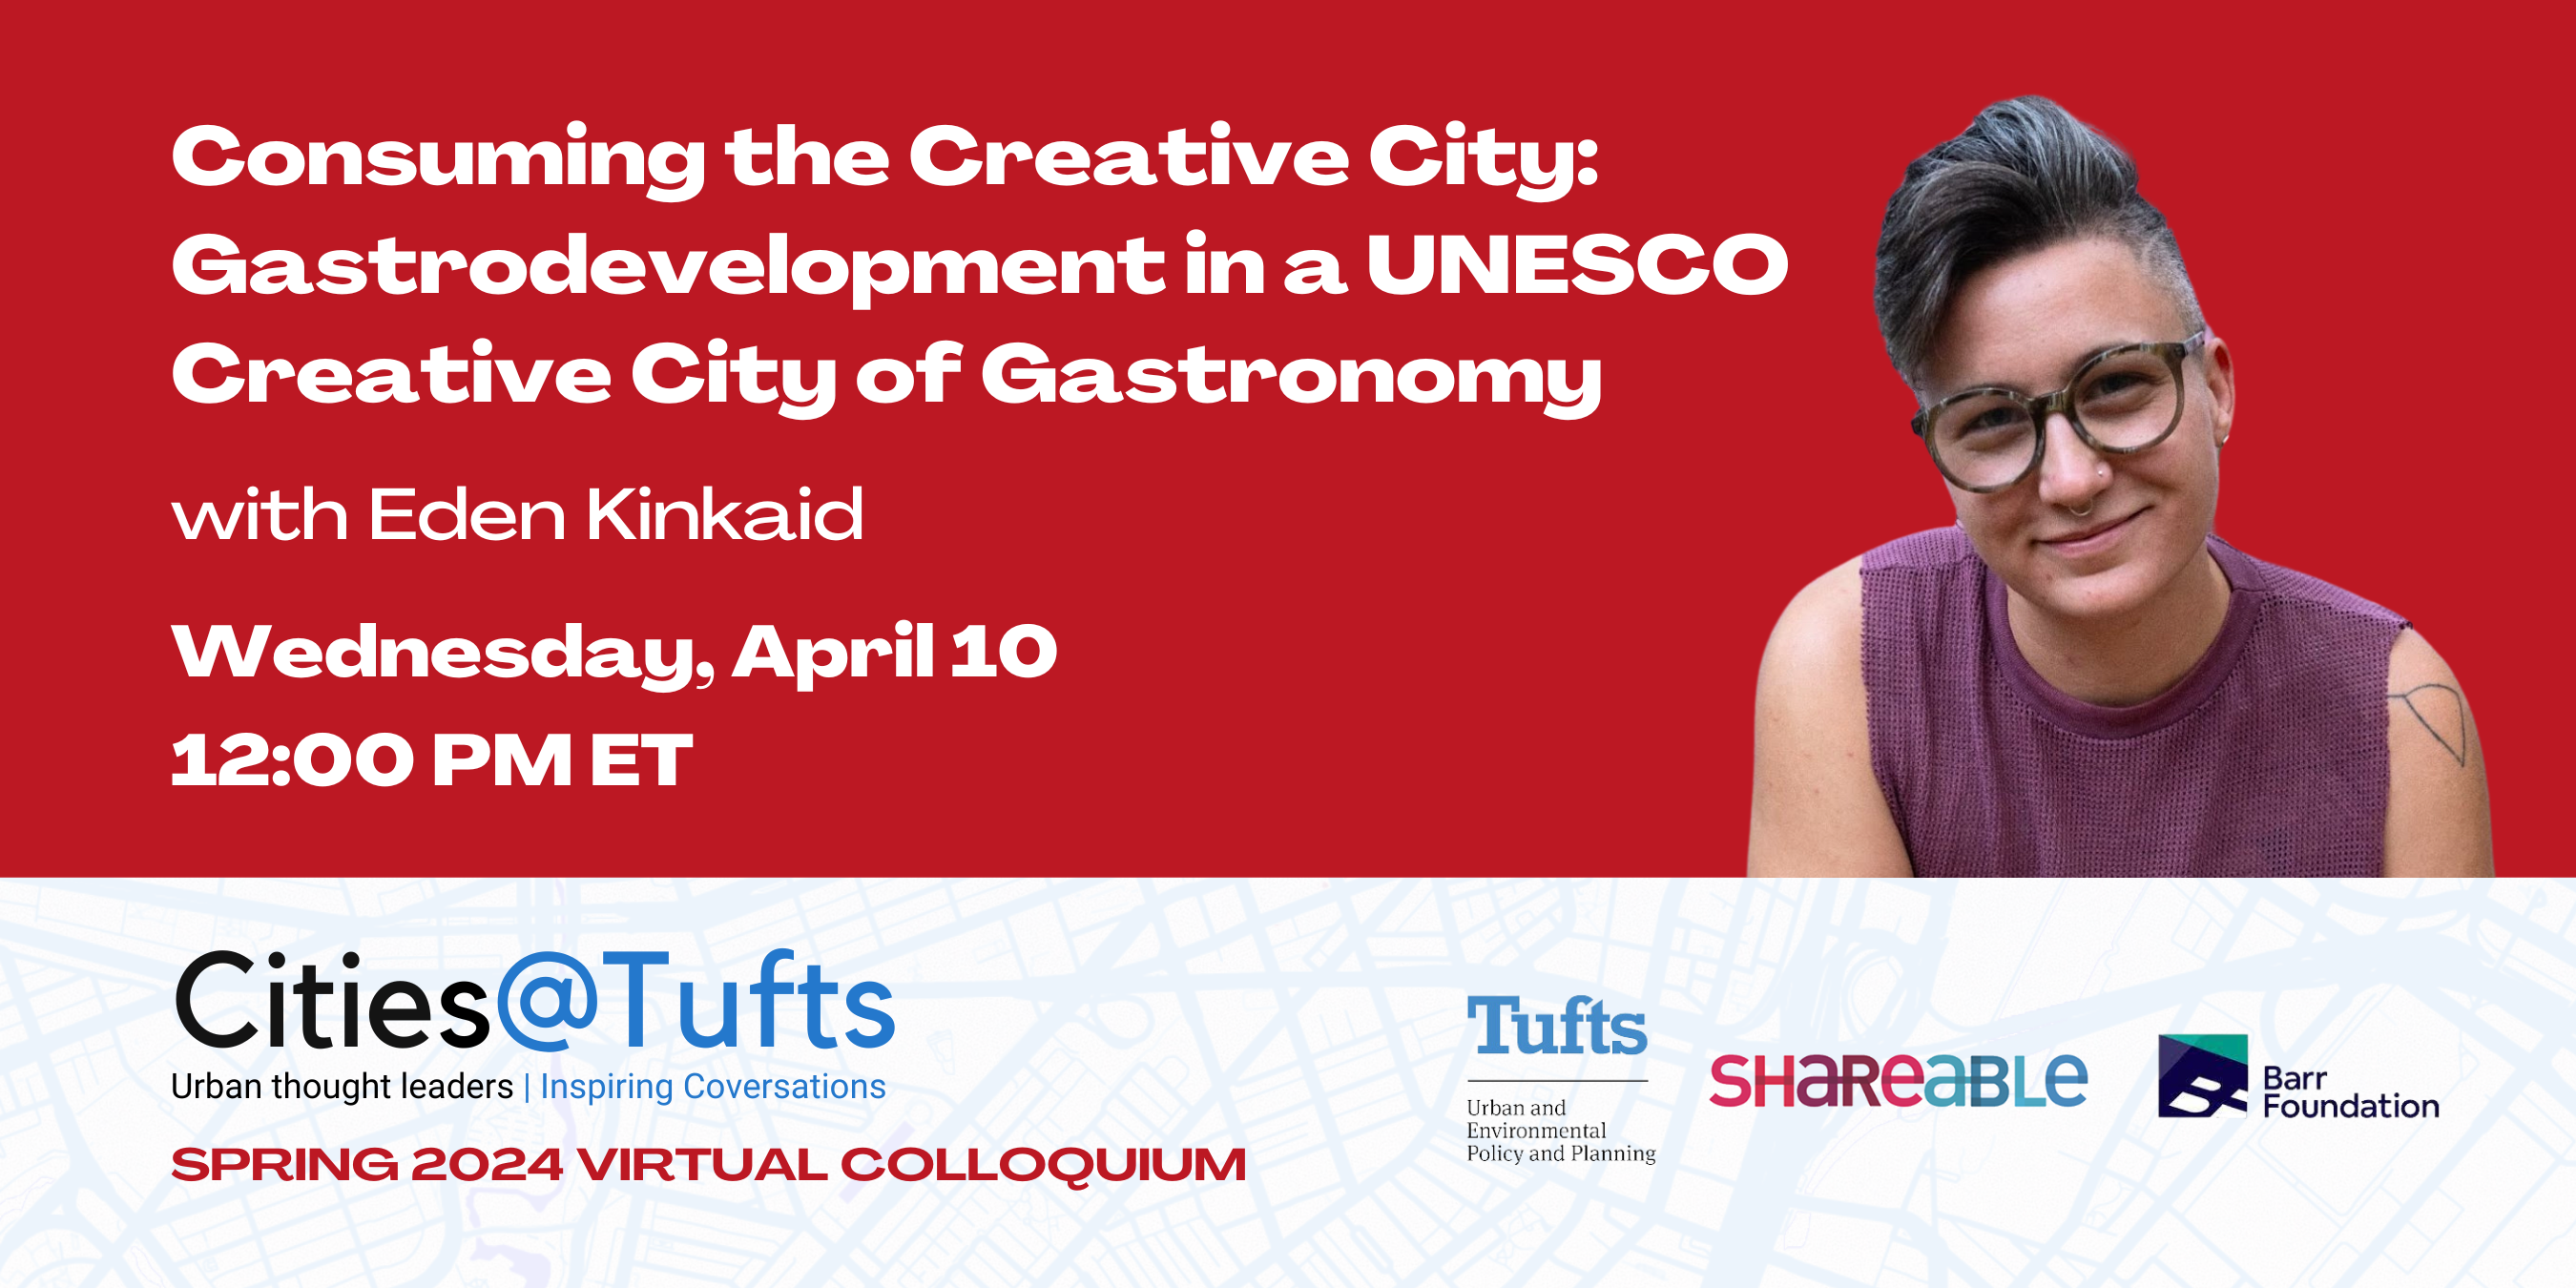 Cities@Tufts promo for an event on Wednesday, April 10 at 12 PM ET. Featuring Eden Kincaid